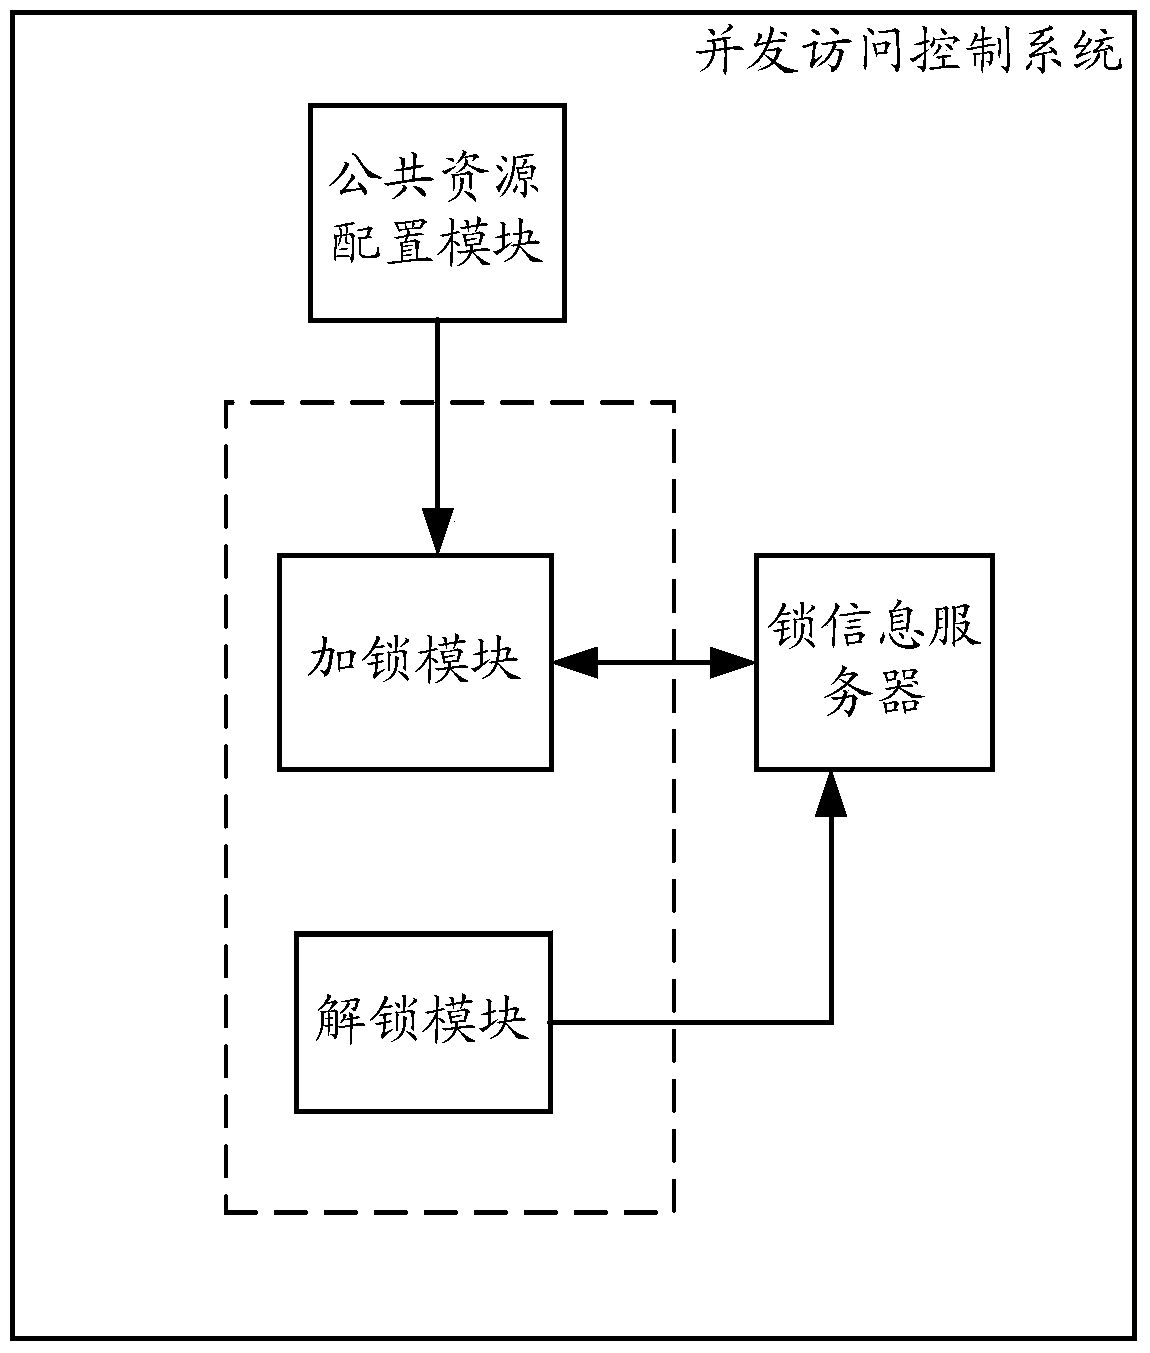 A method and system for concurrent access control